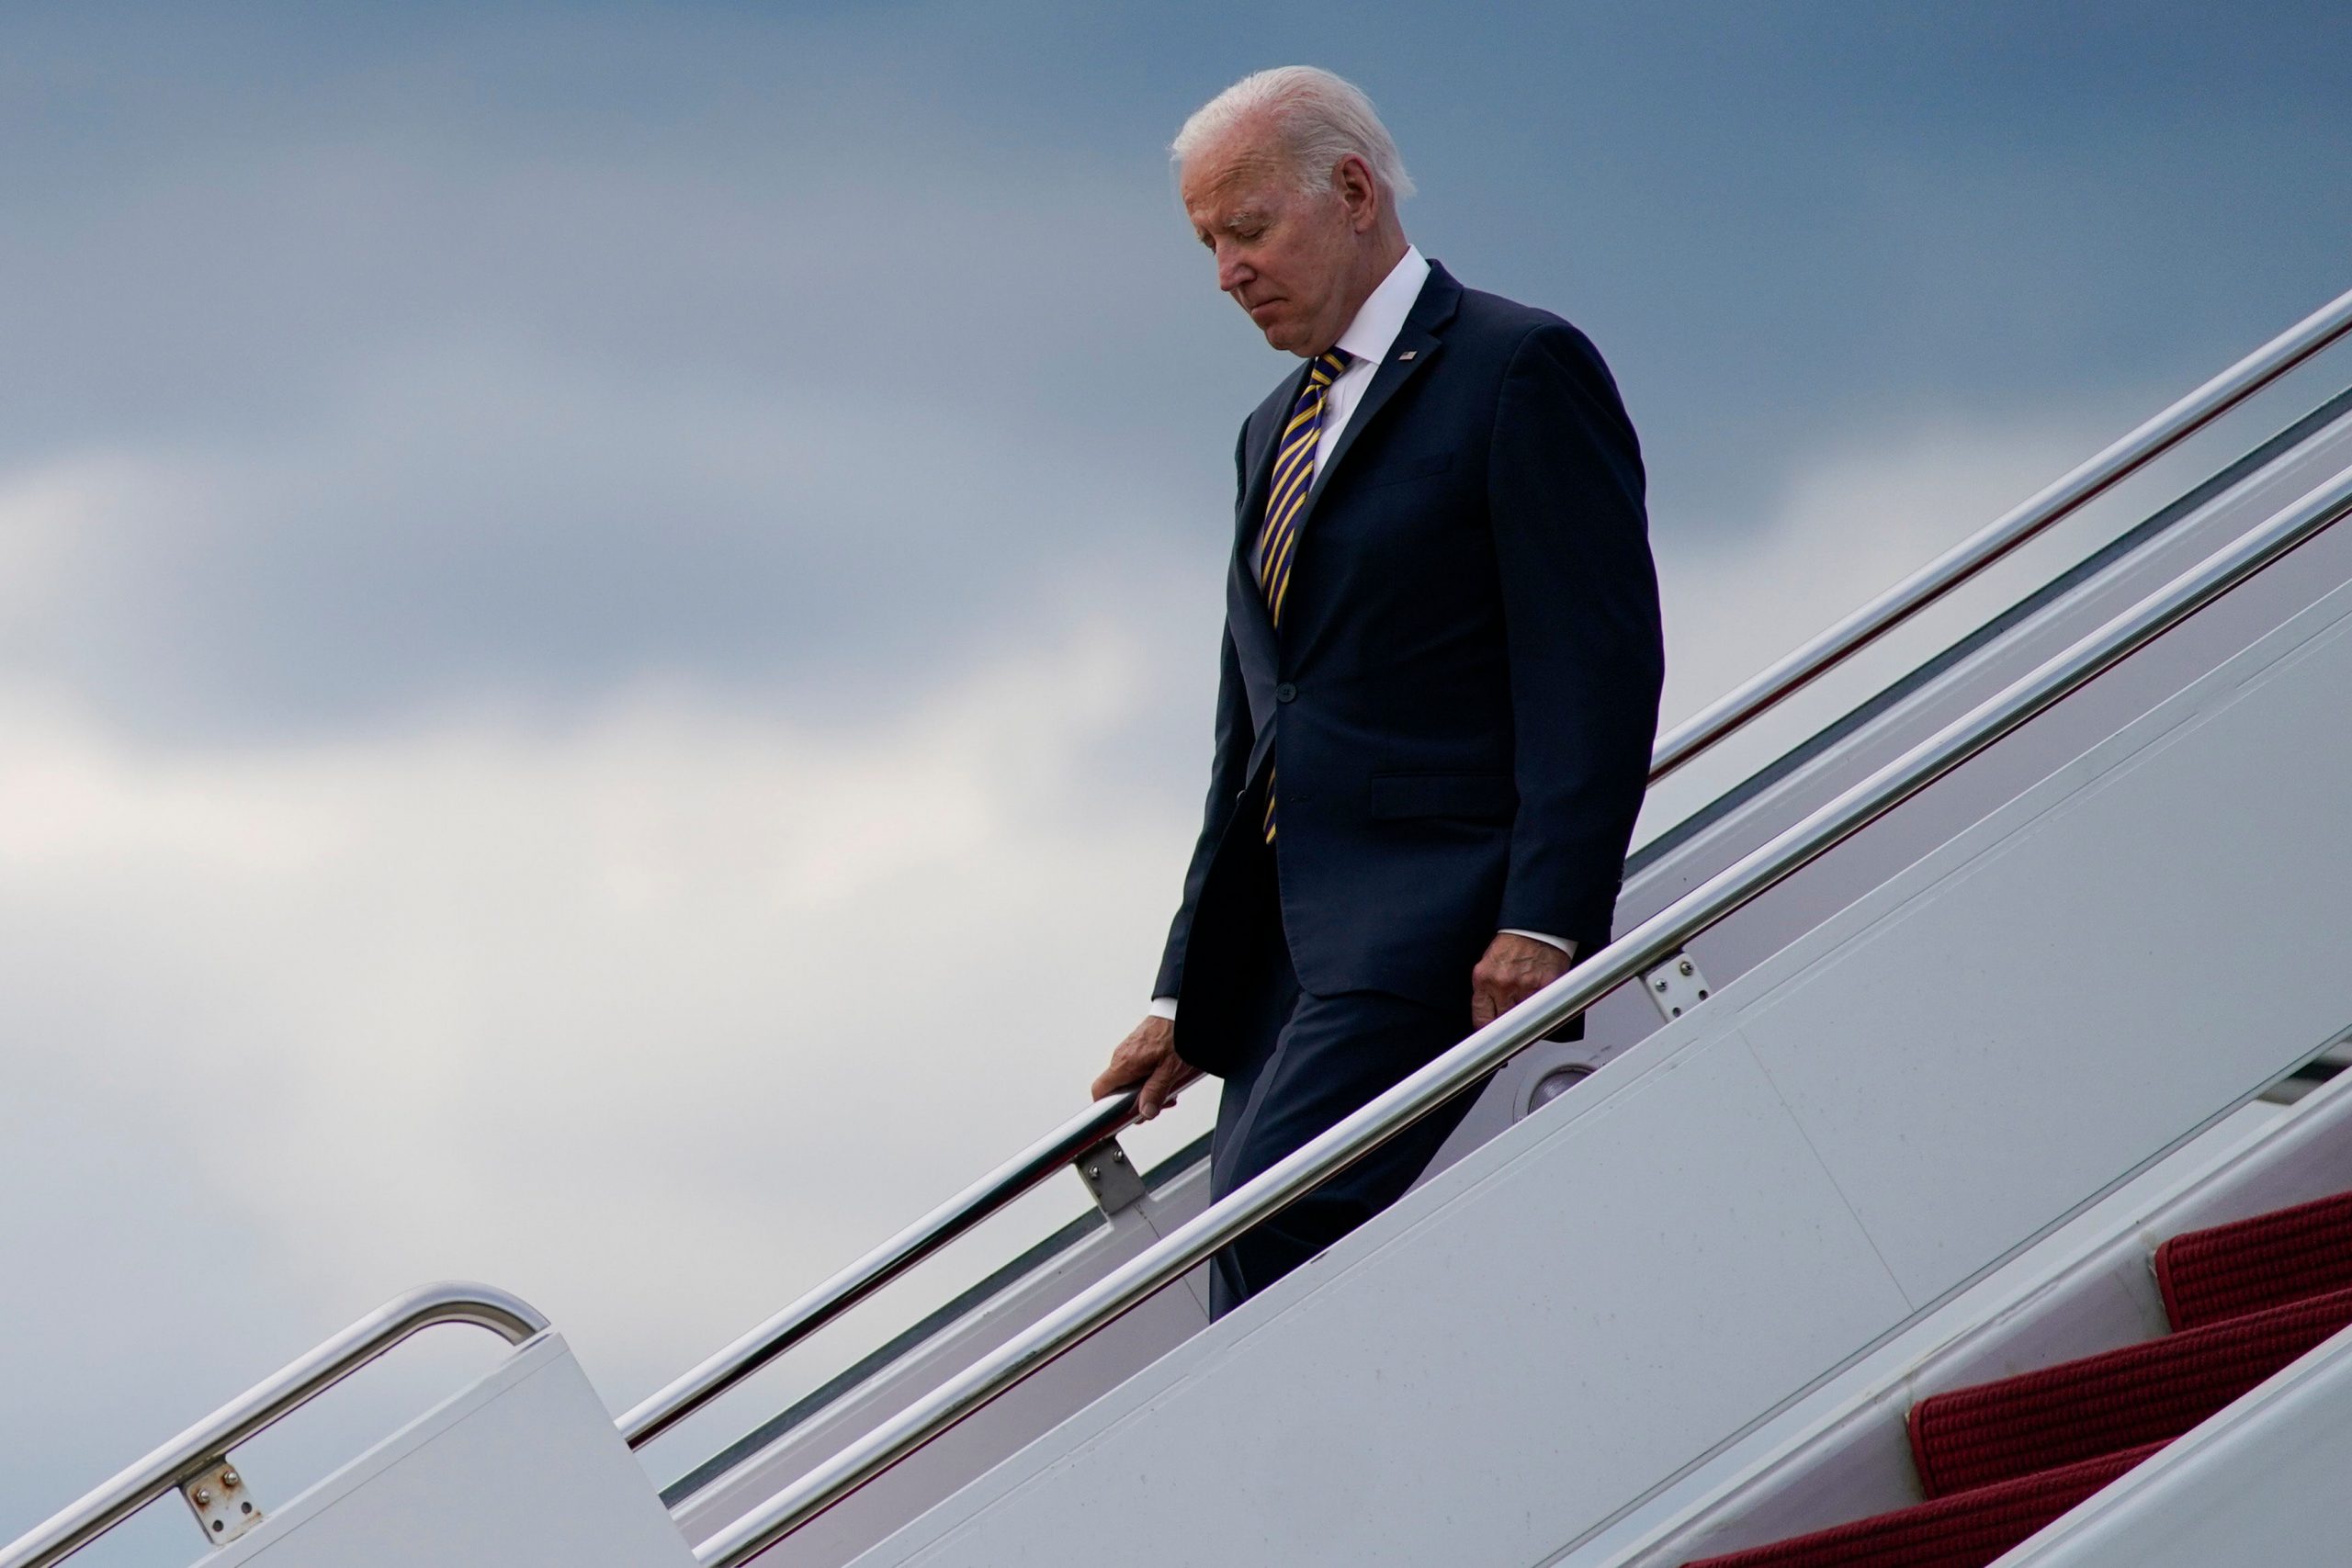 Joe Biden’s trip to the Middle East: 6 things to look out for